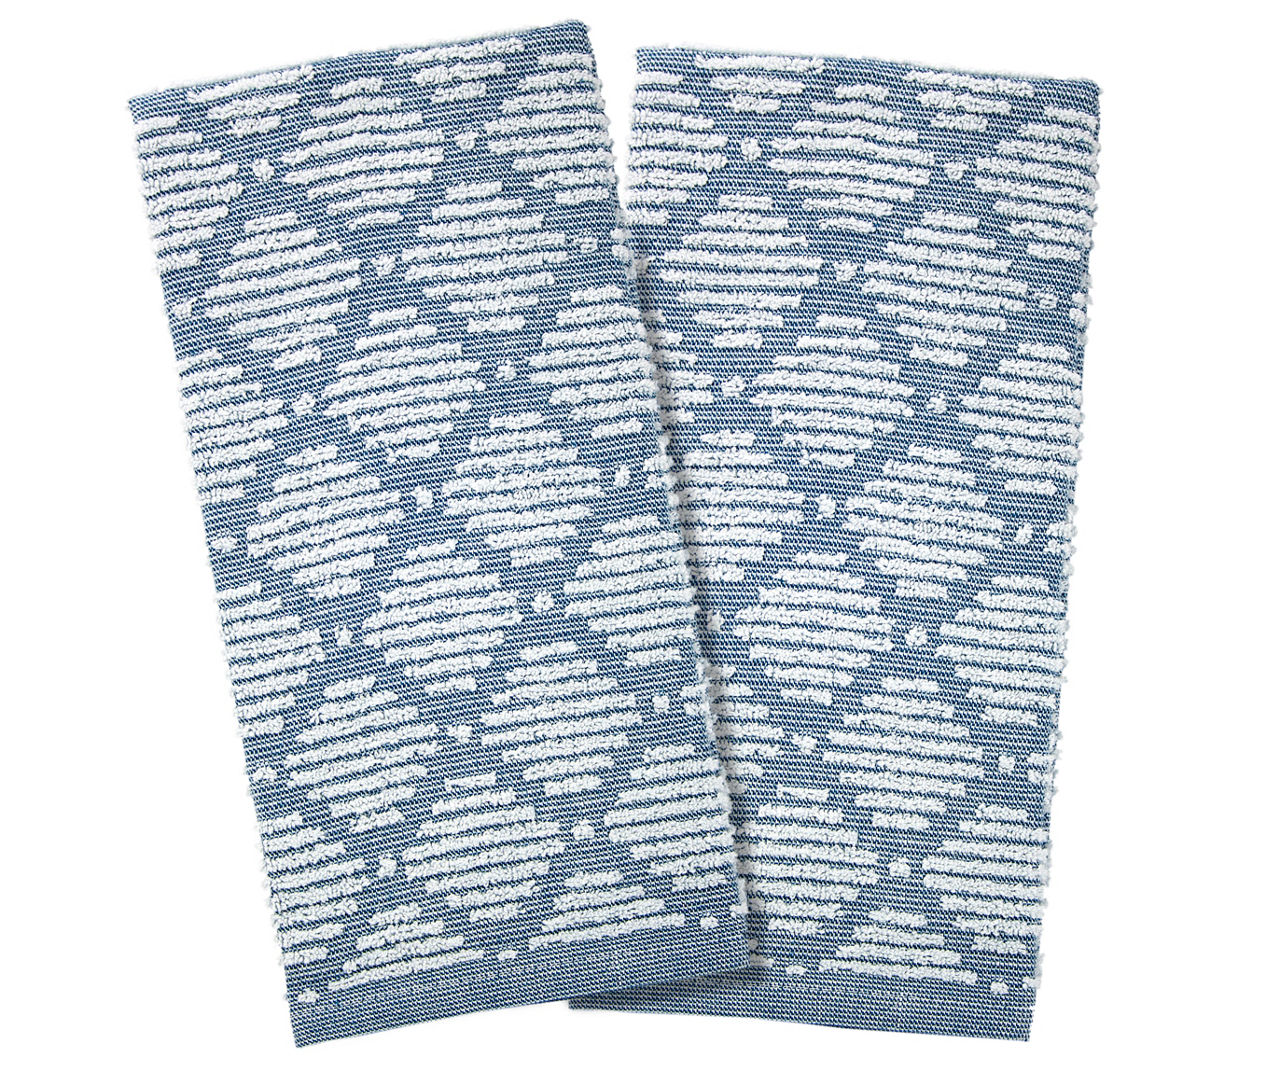 CUISINART KITCHEN TOWELS (2) OVERSIZED BLUE WHITE FLORAL 18 X 28